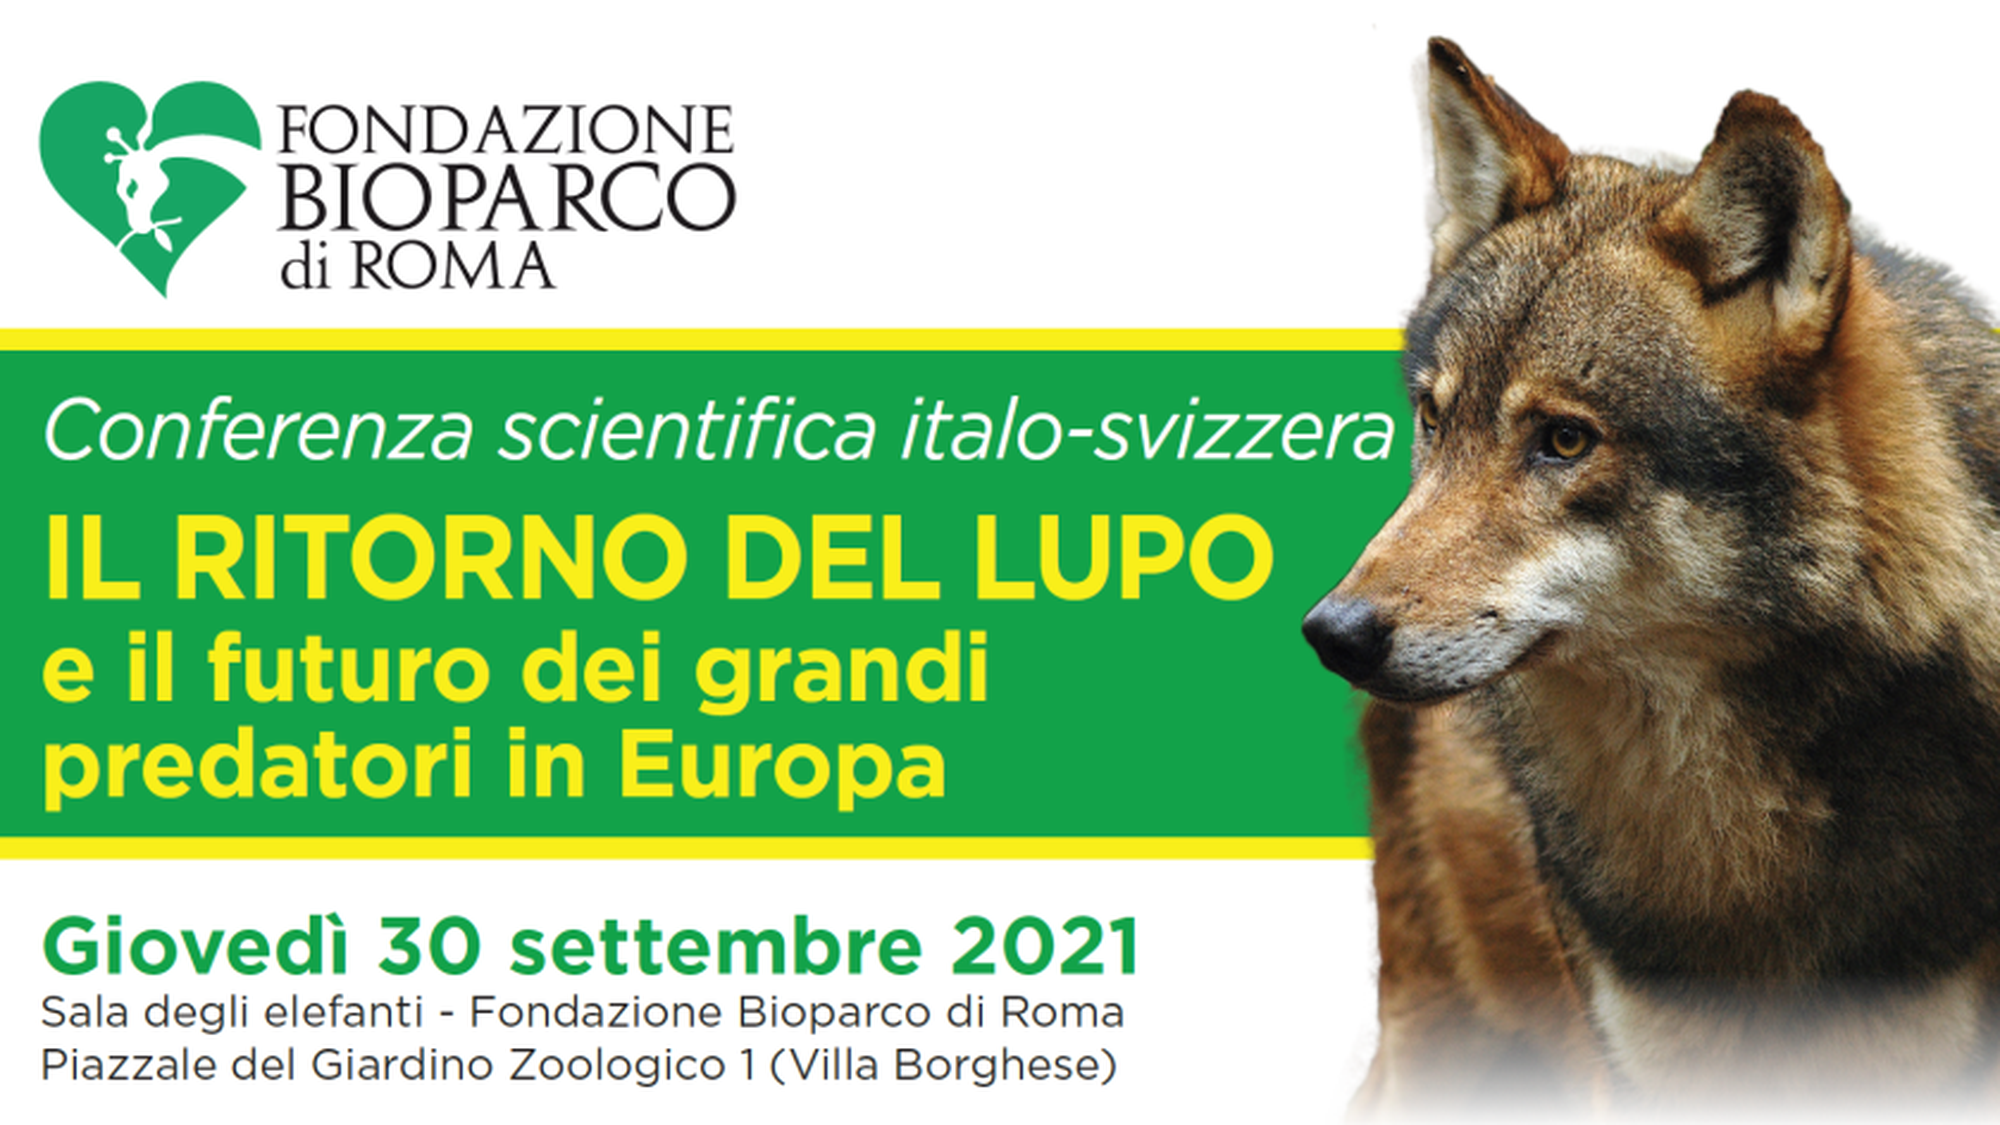 Poster for the Italian-Swiss scientific conference